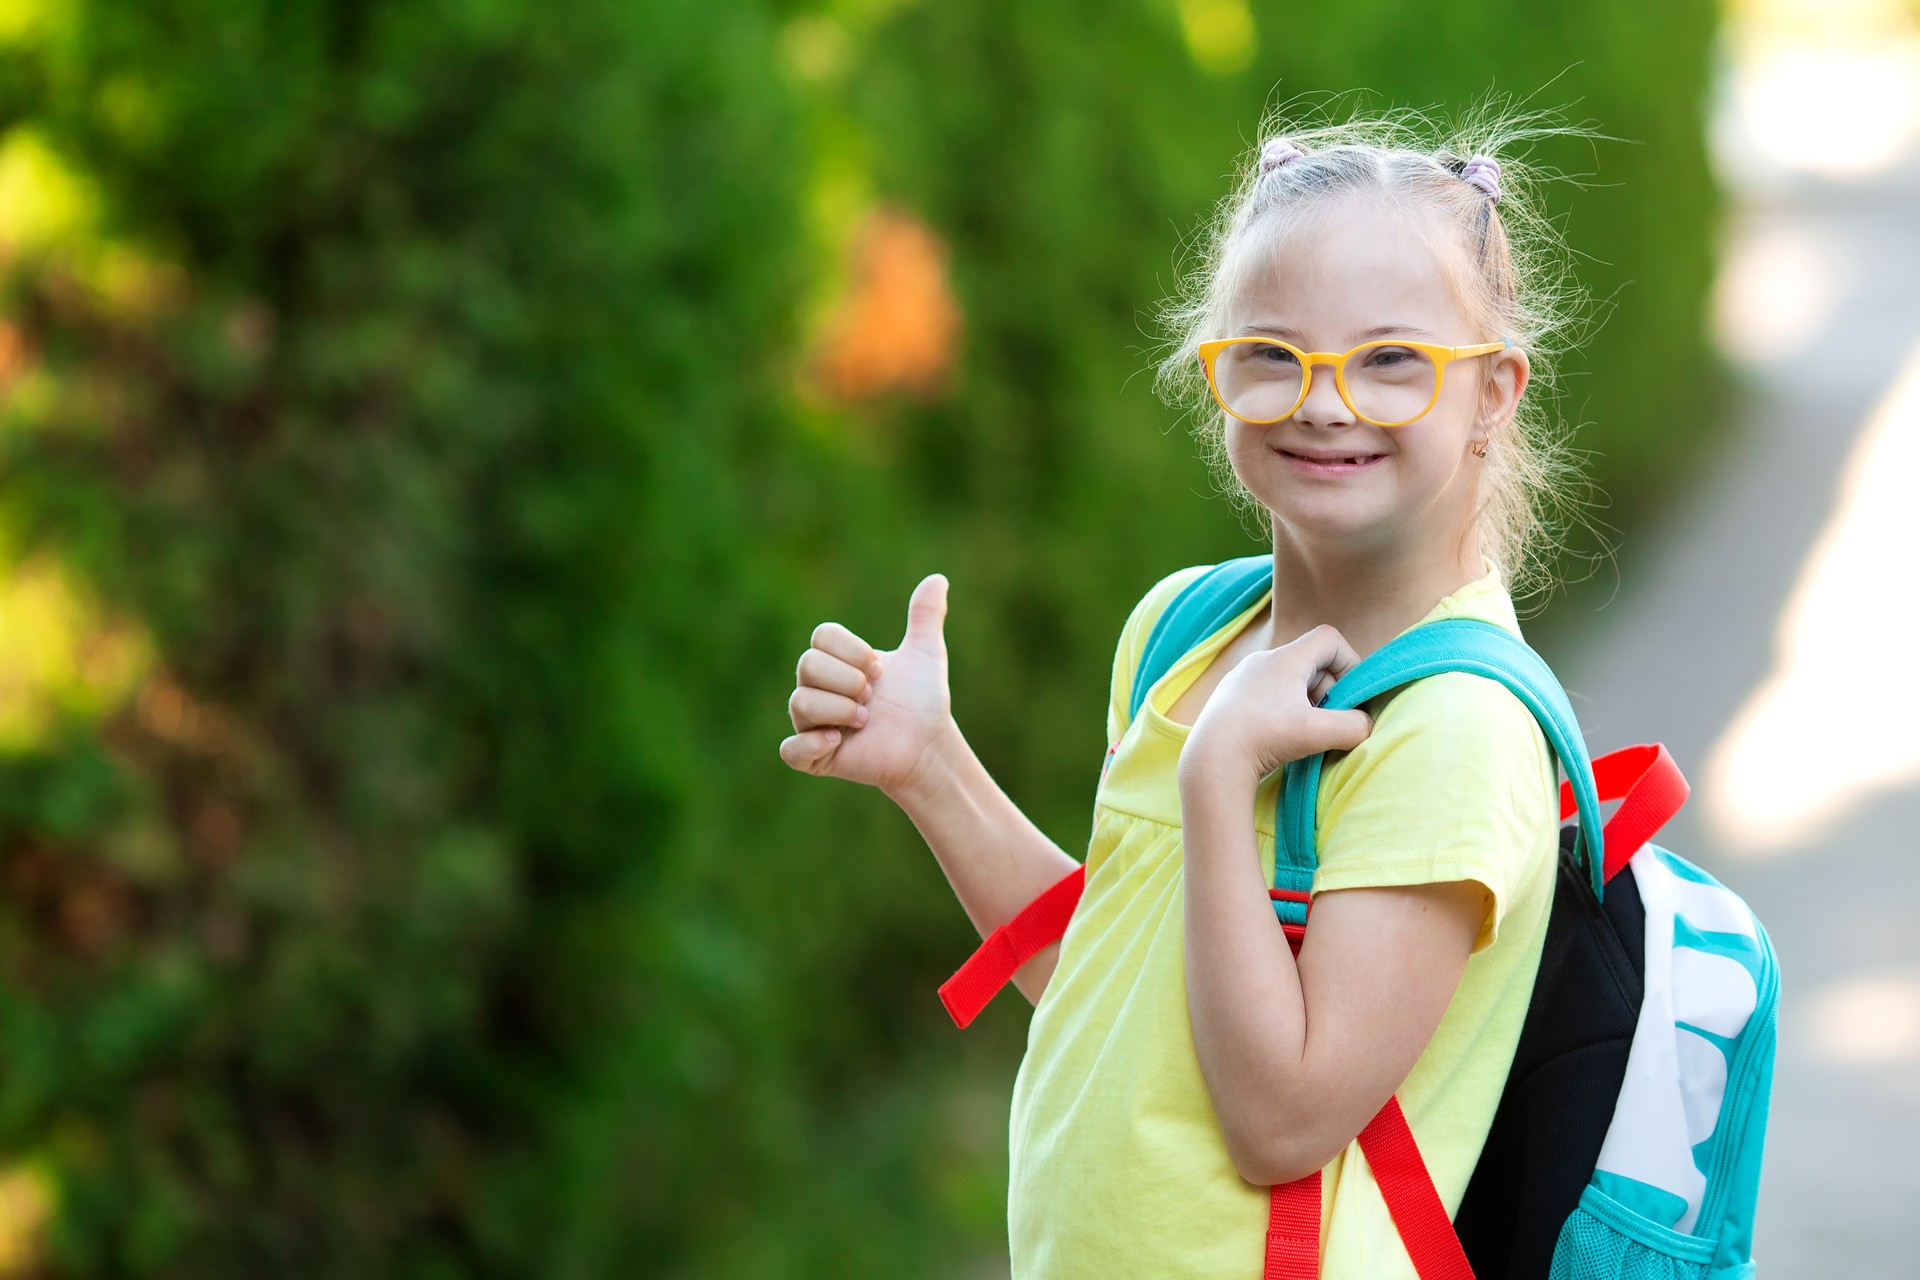 A girl with Down syndrome goes to school with a backpack